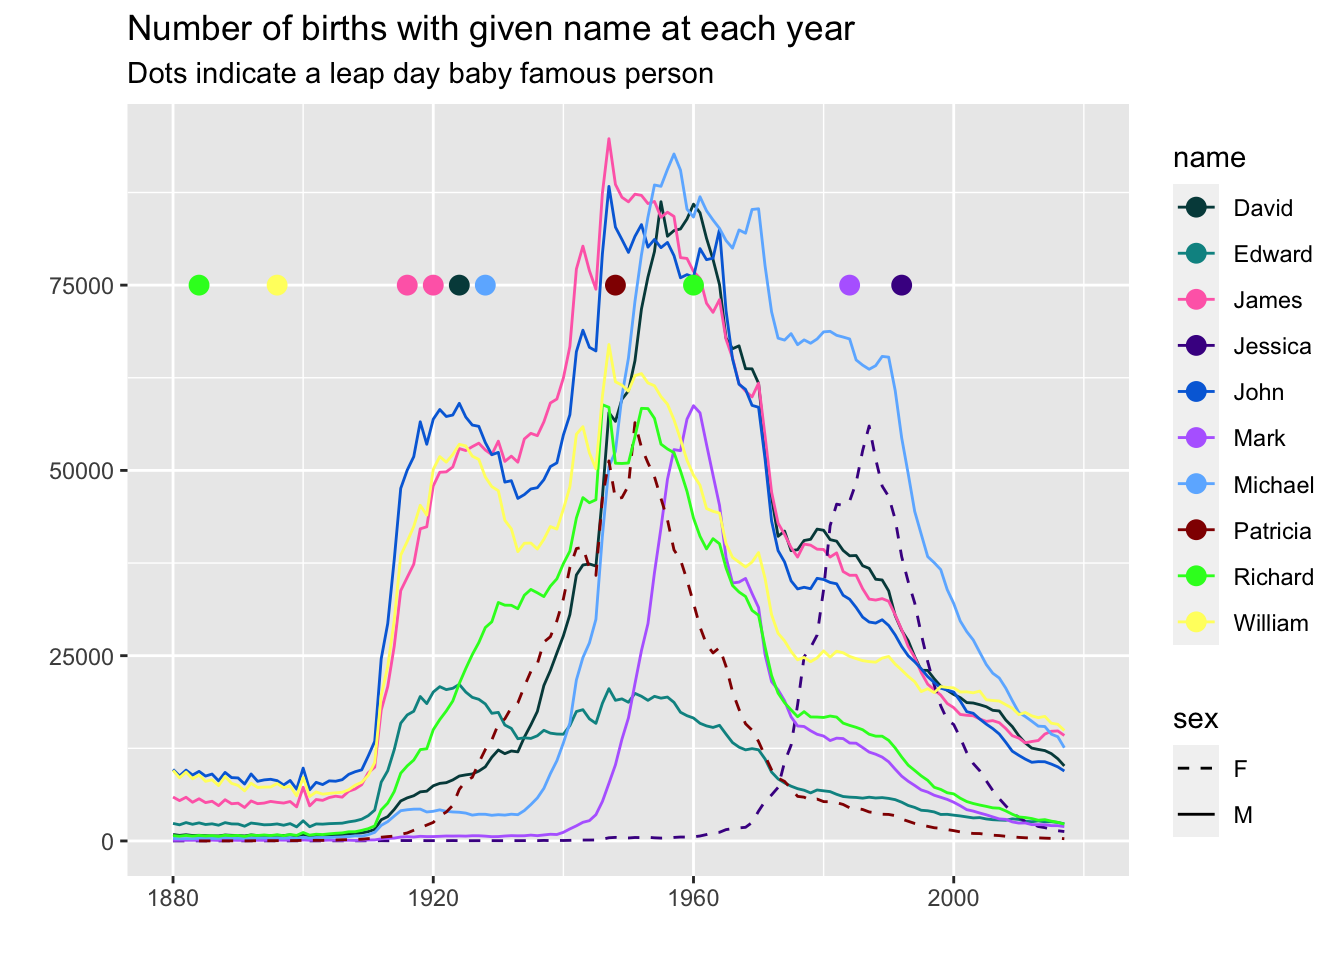 Line plots showing the trends of baby naming in the US from 1880 to 2017. The names were chosen because, of the leap day birthday set, they were the names that were the most popular in the US across time. Across the board, the names were most popular from about 1940 to 1970.